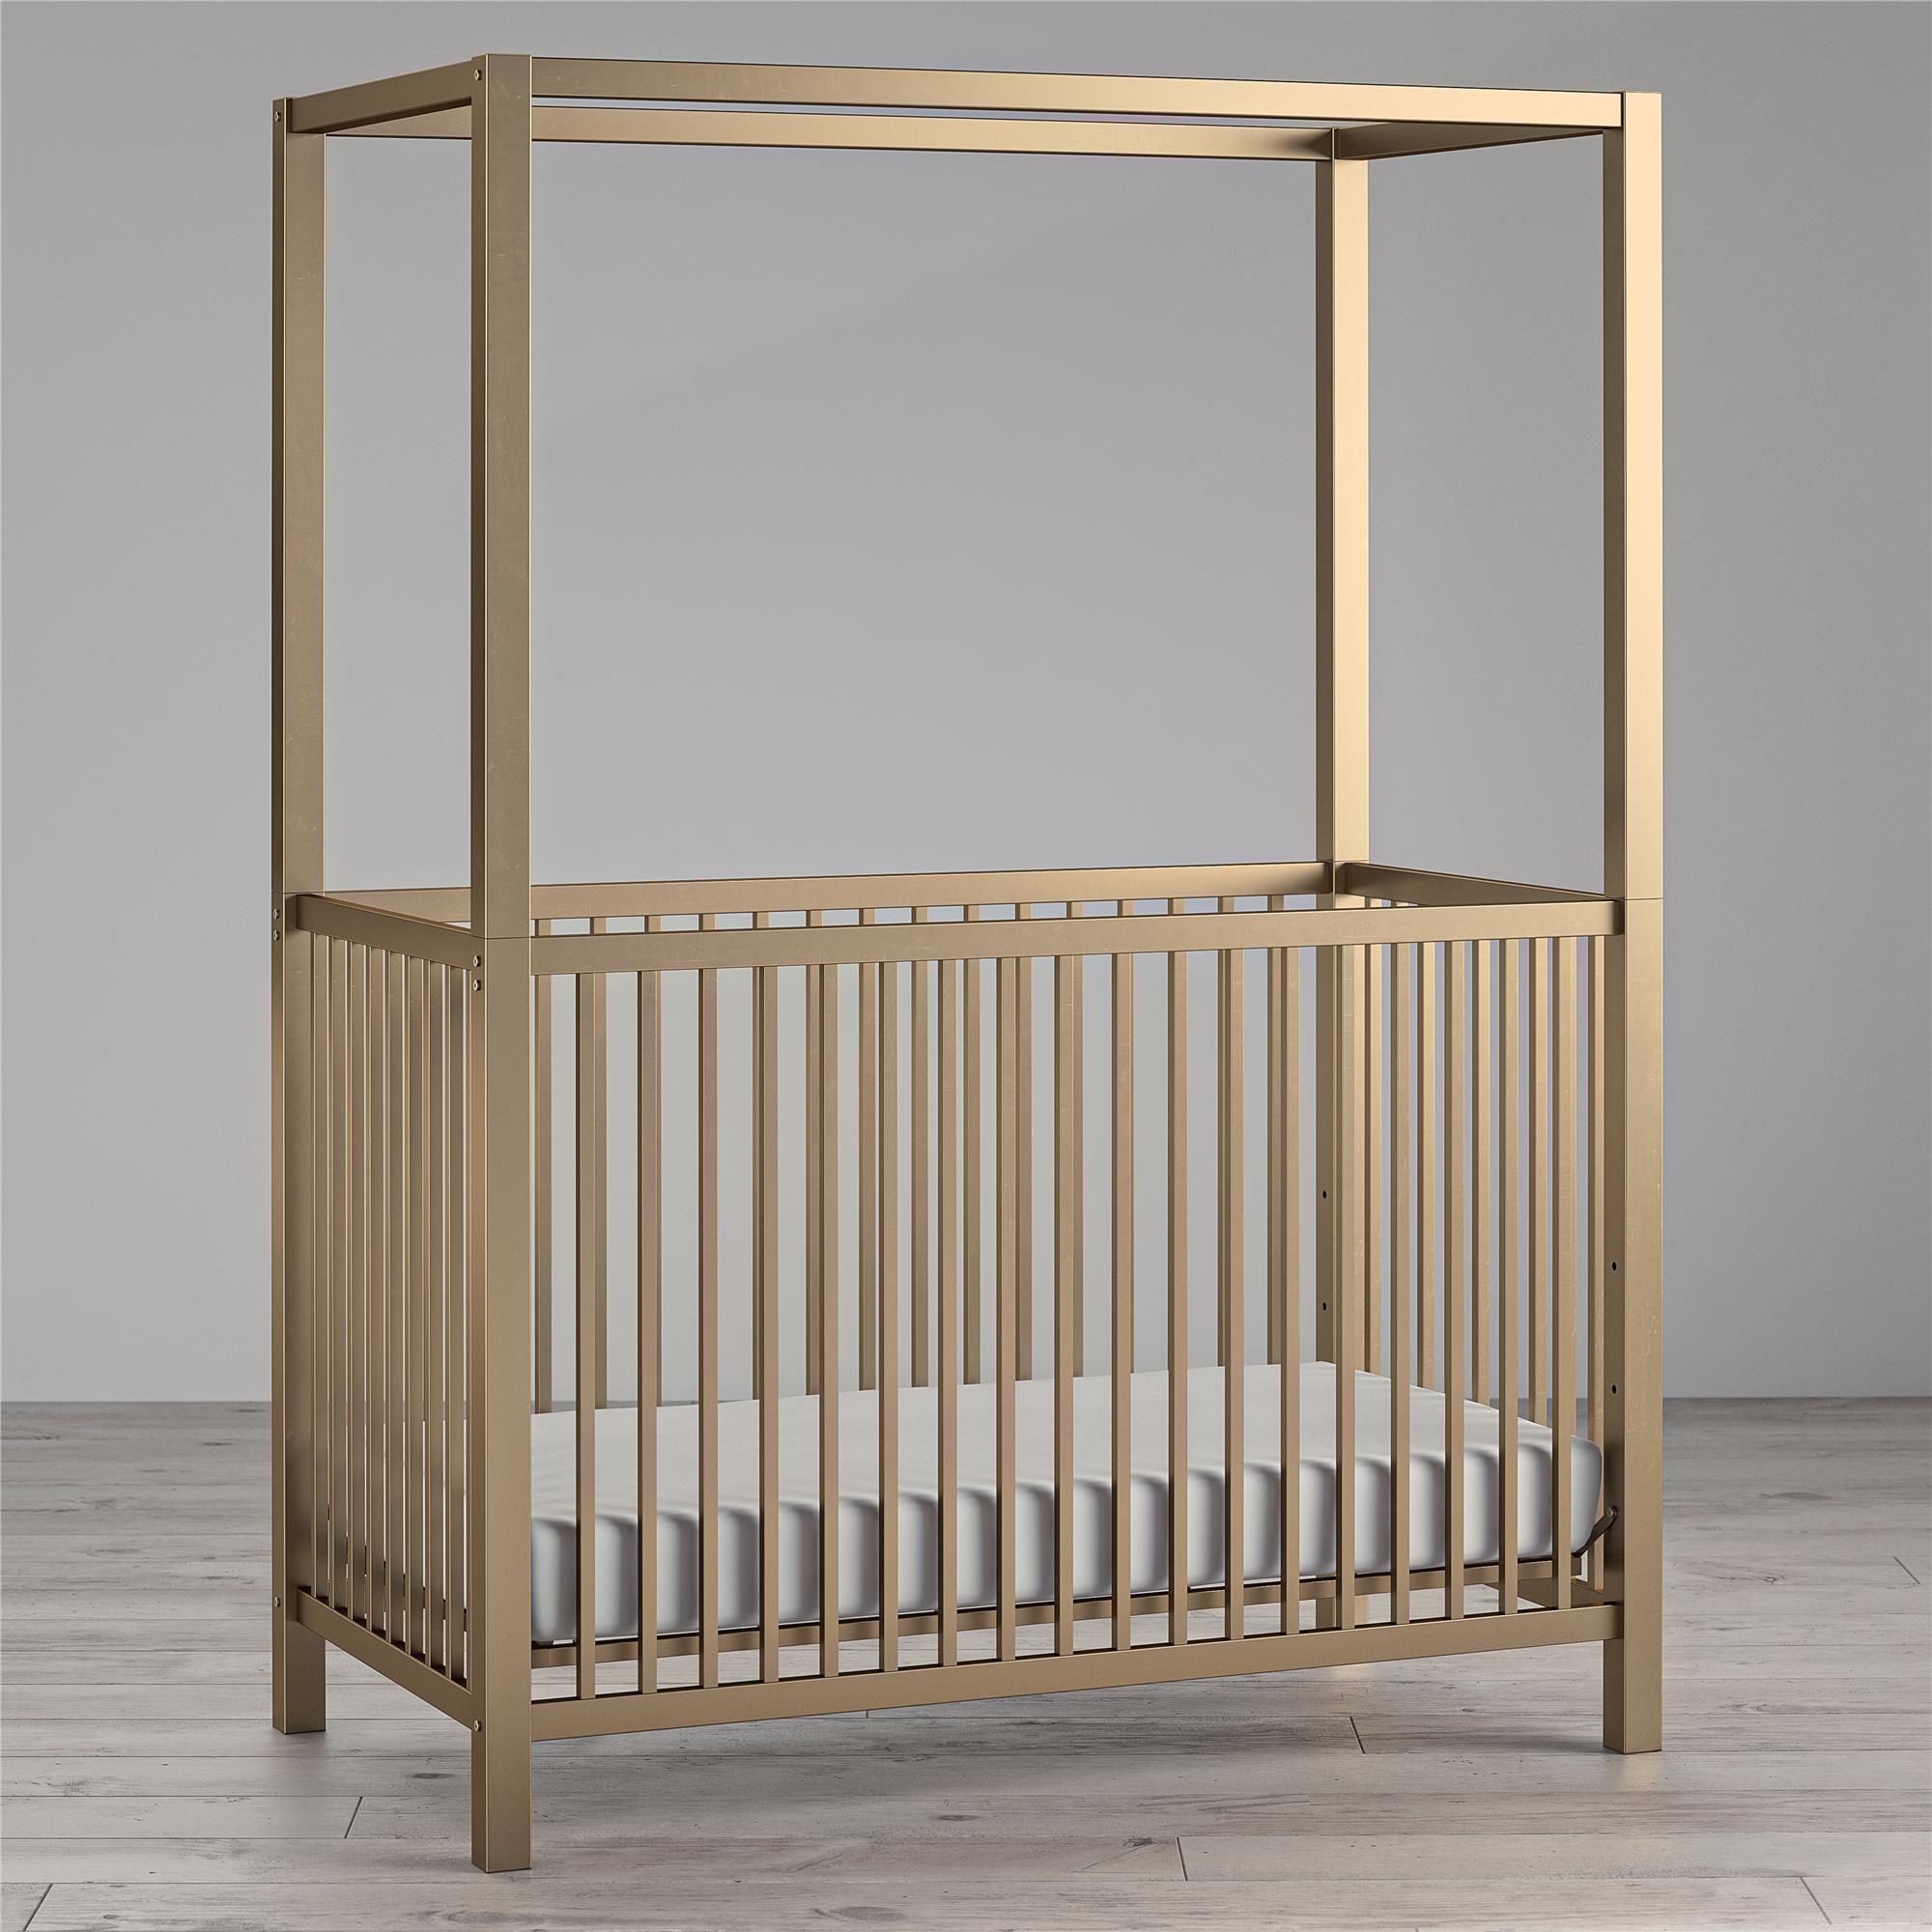 Little Seeds Monarch Hill Haven Gold Metal Canopy Crib - image 3 of 16